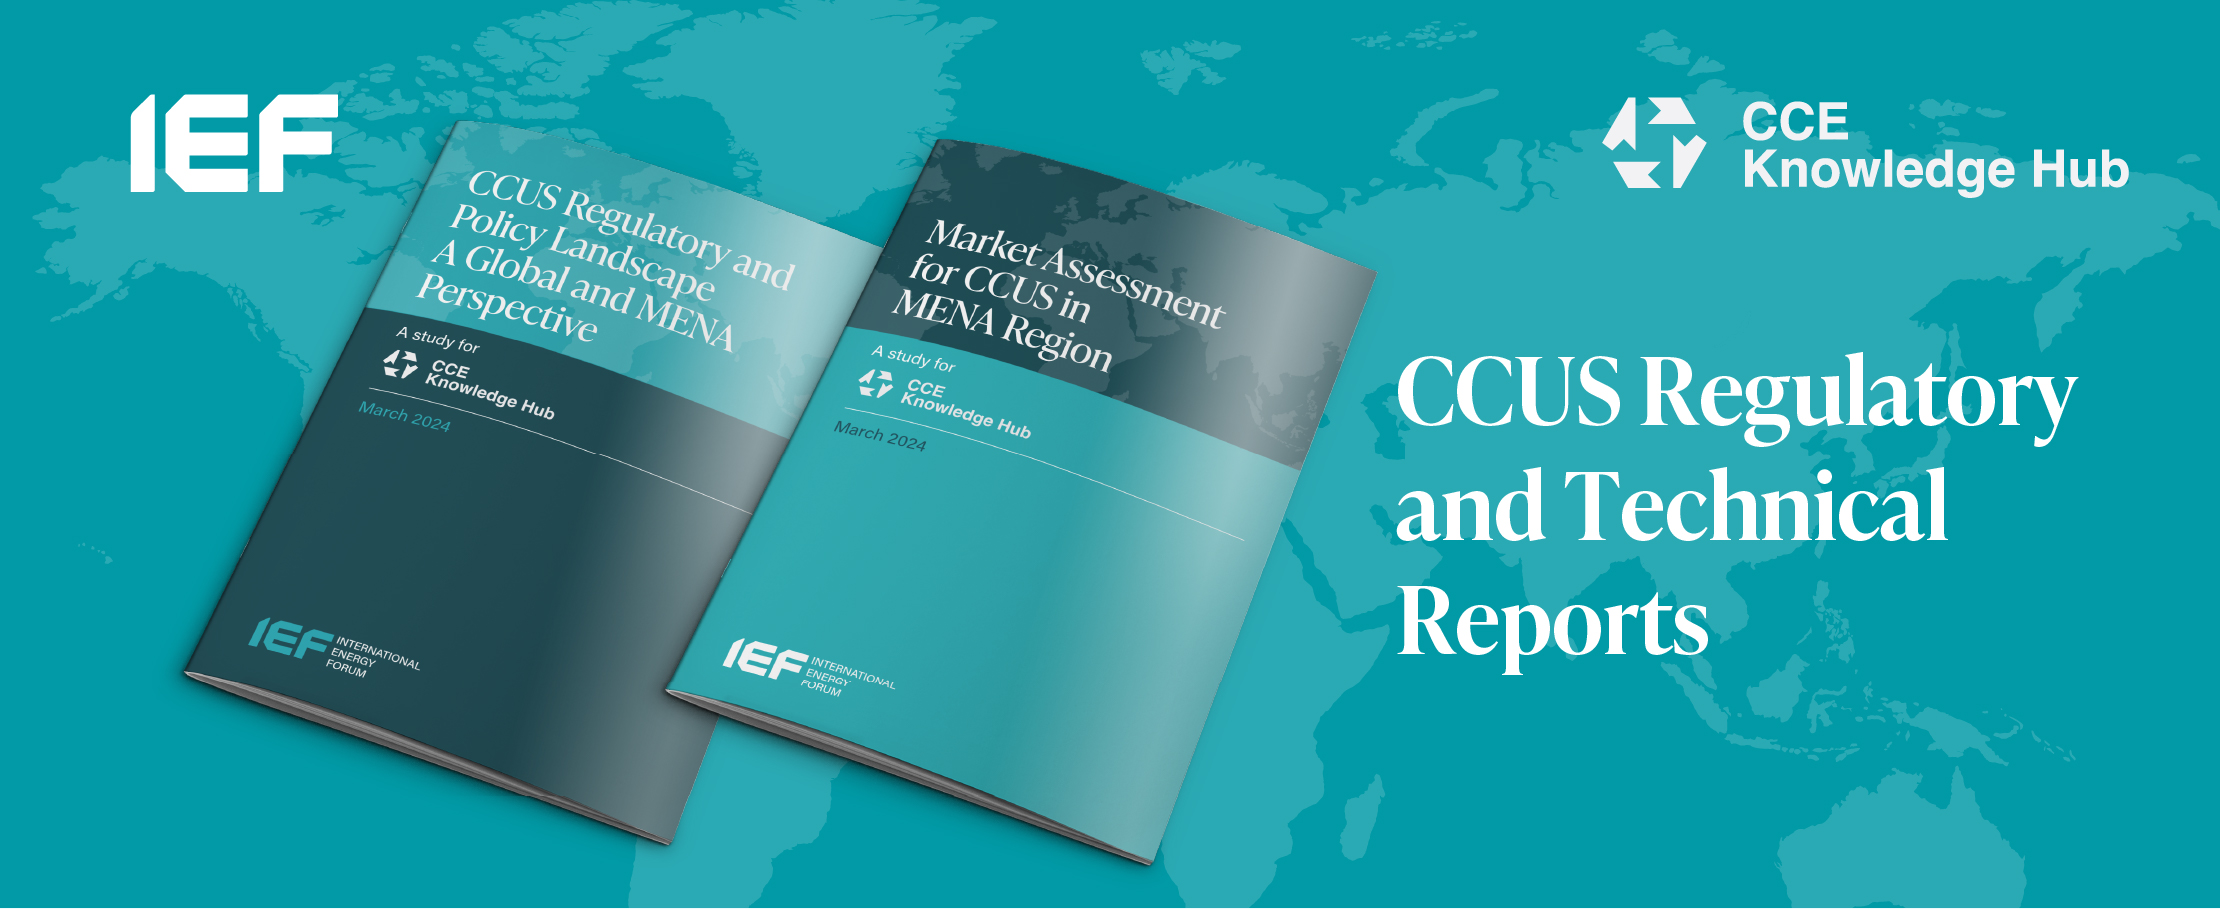 CCUS Regulatory and Technology Reports